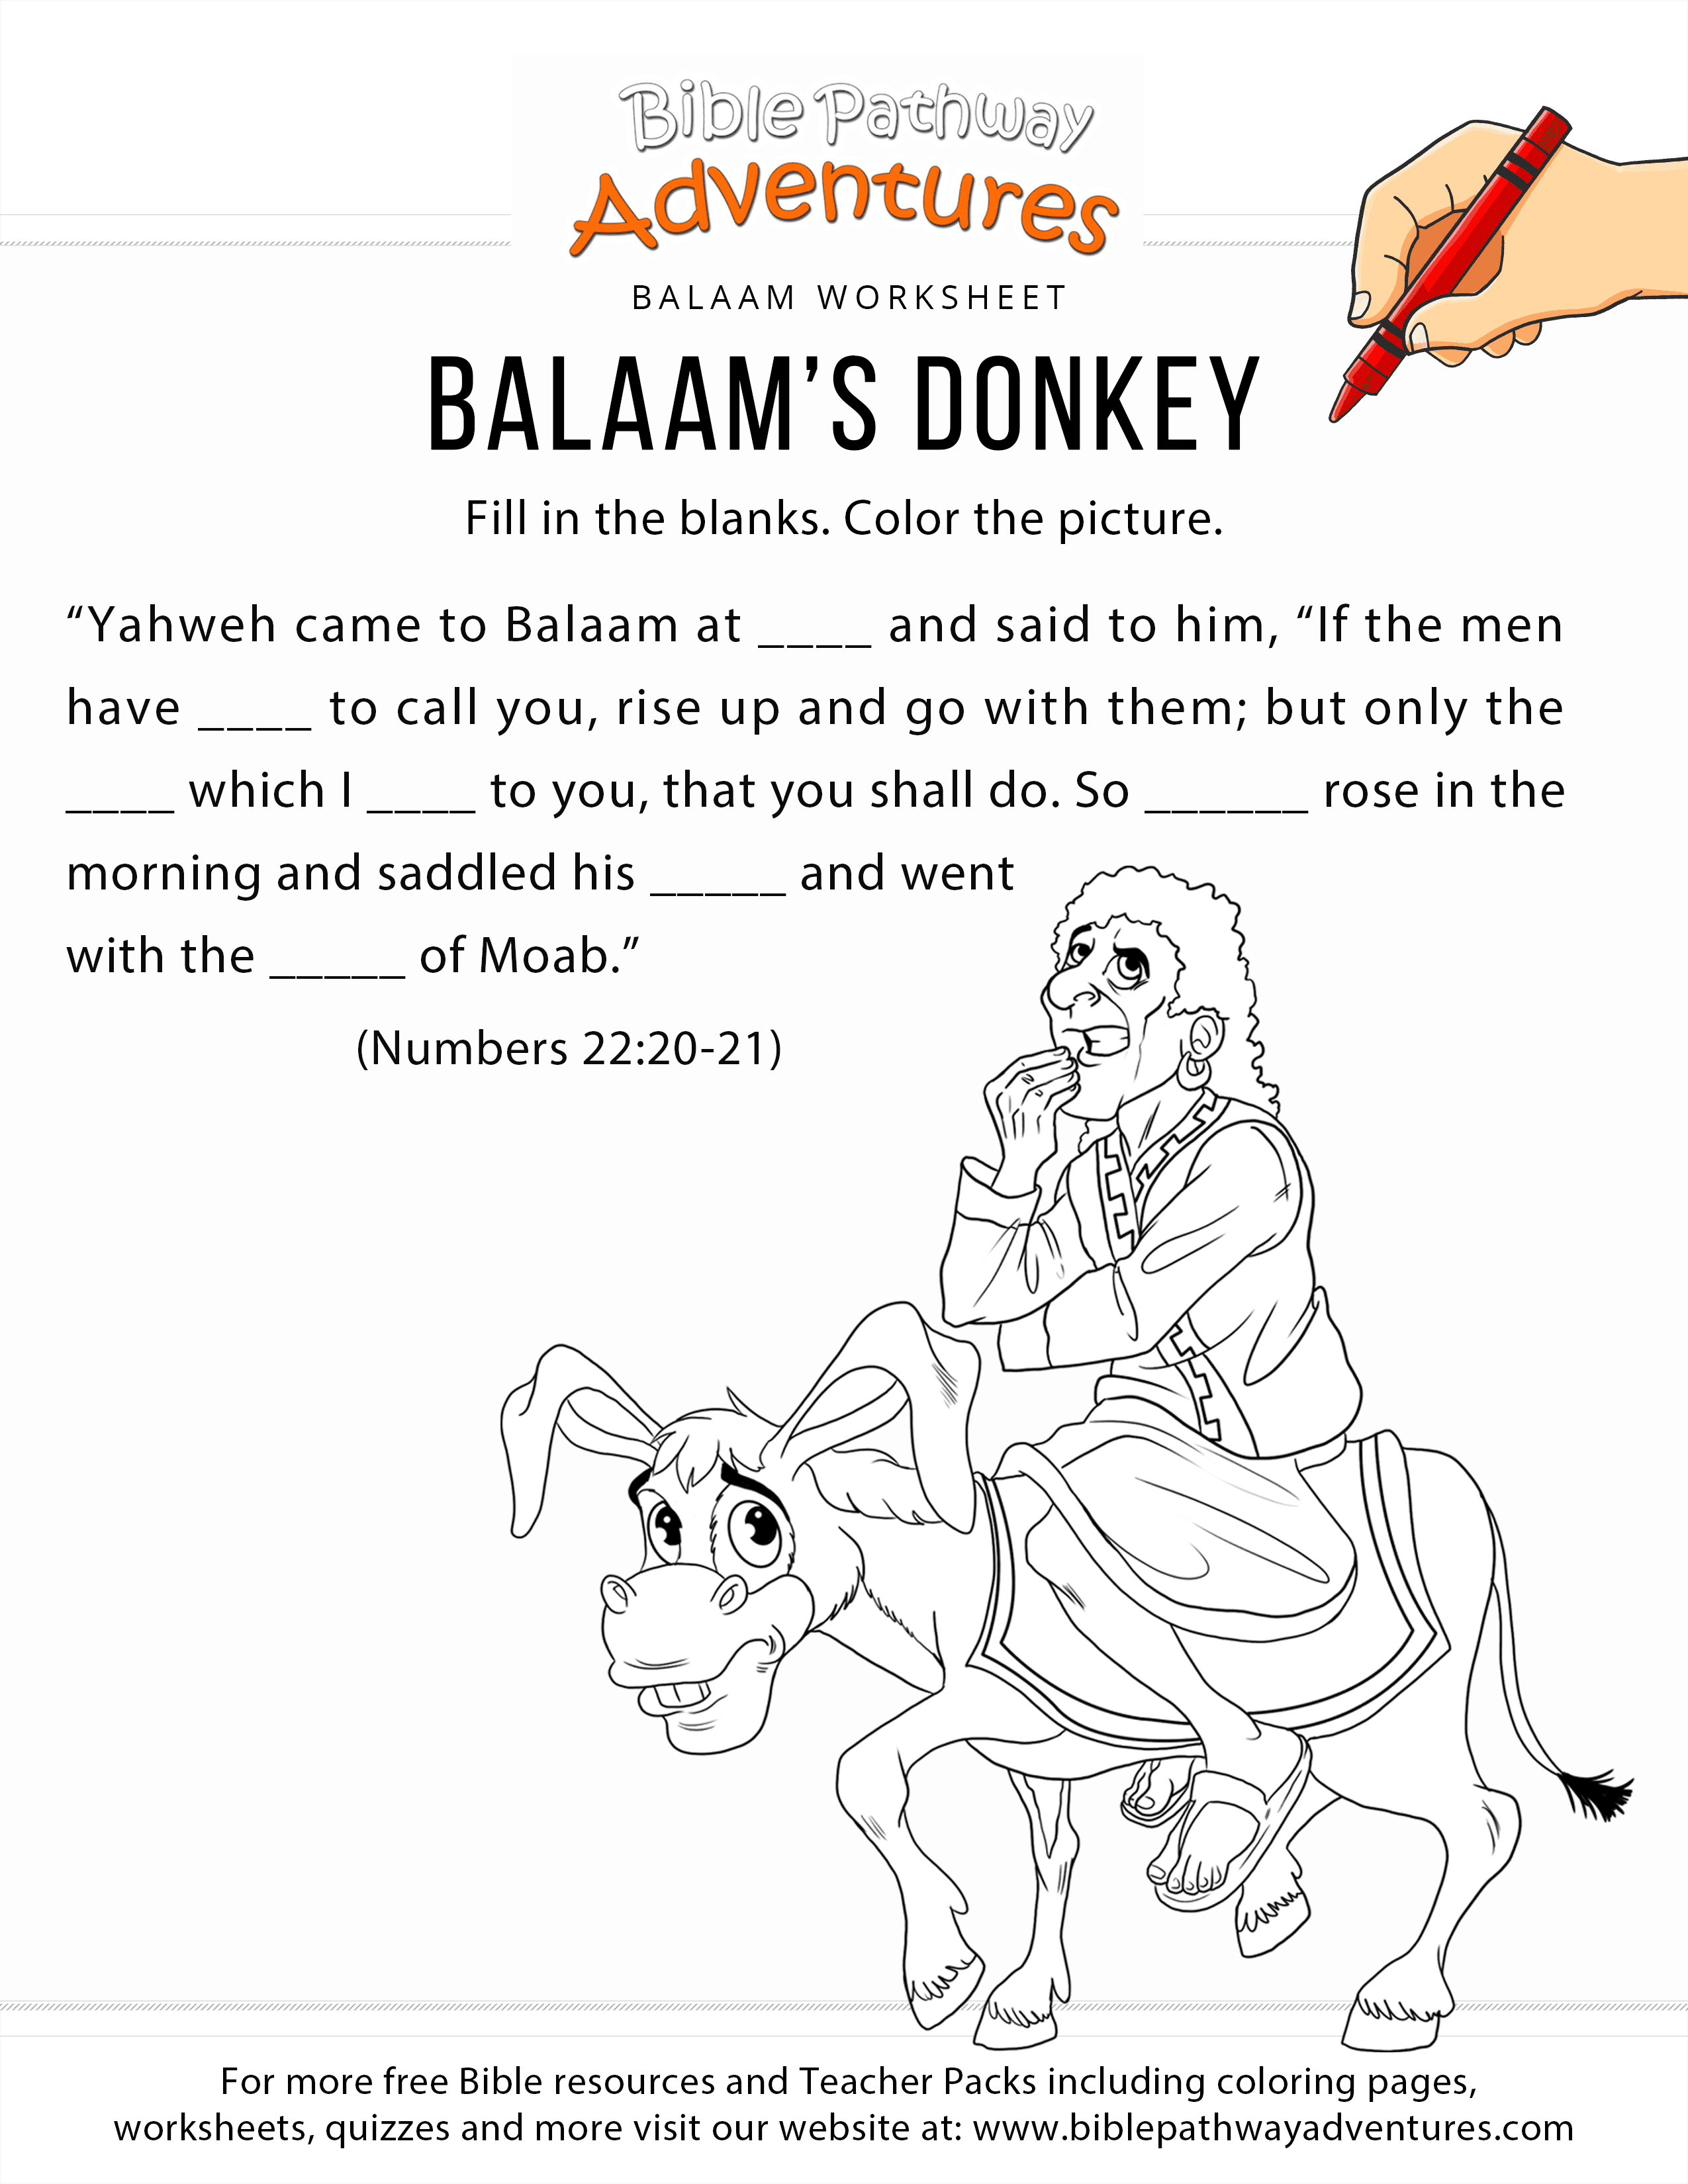 Donkey Coloring Page Balaams Donkey Worksheet And Coloring Page Bible Pathway Adventures